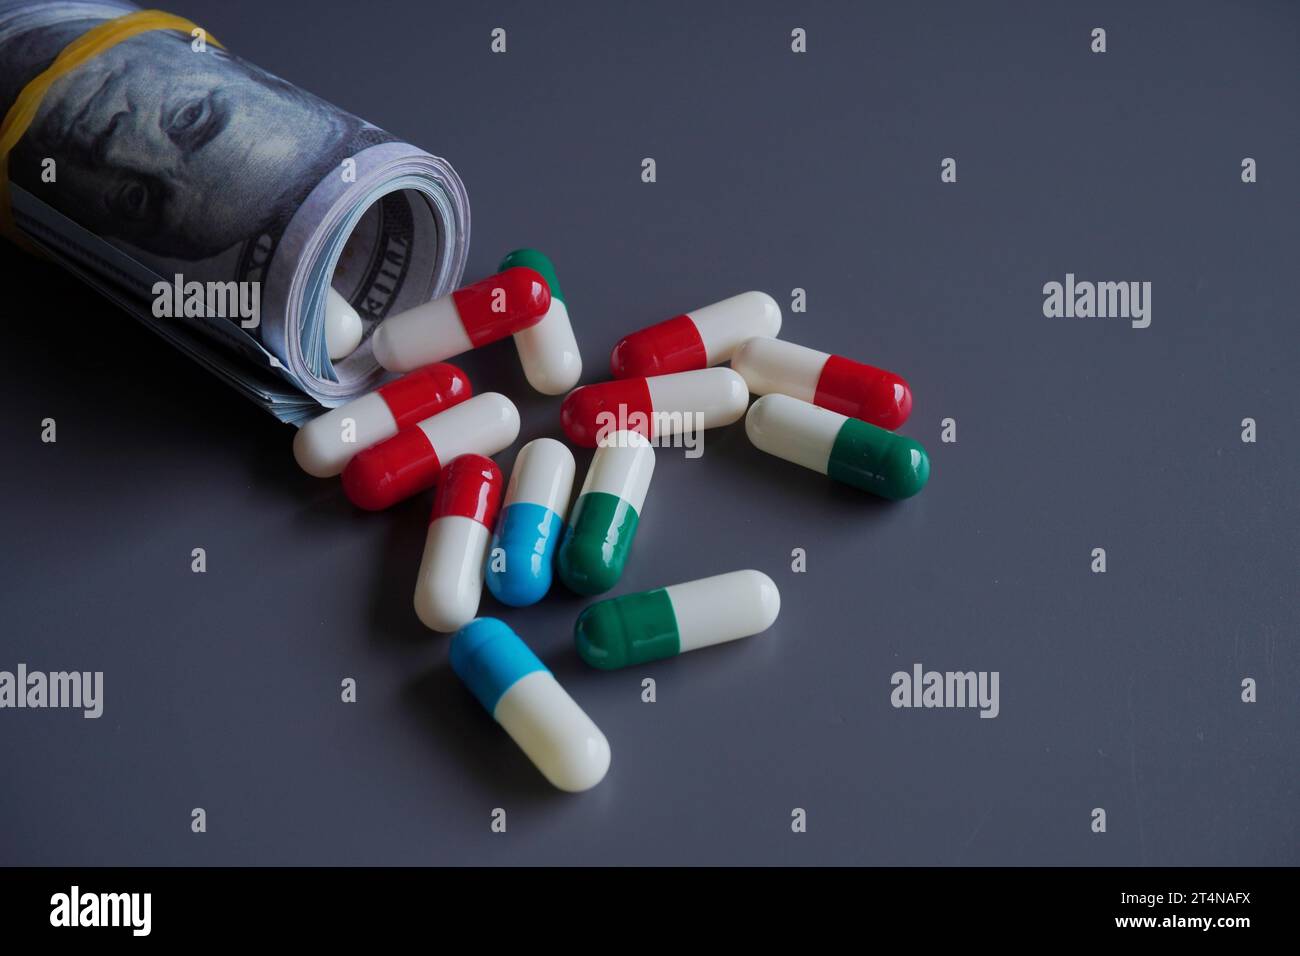 Money rolled up with medicine pills flowing out isolated on black background. Pharmaceutical industry profit, medical expenses concept. Stock Photo